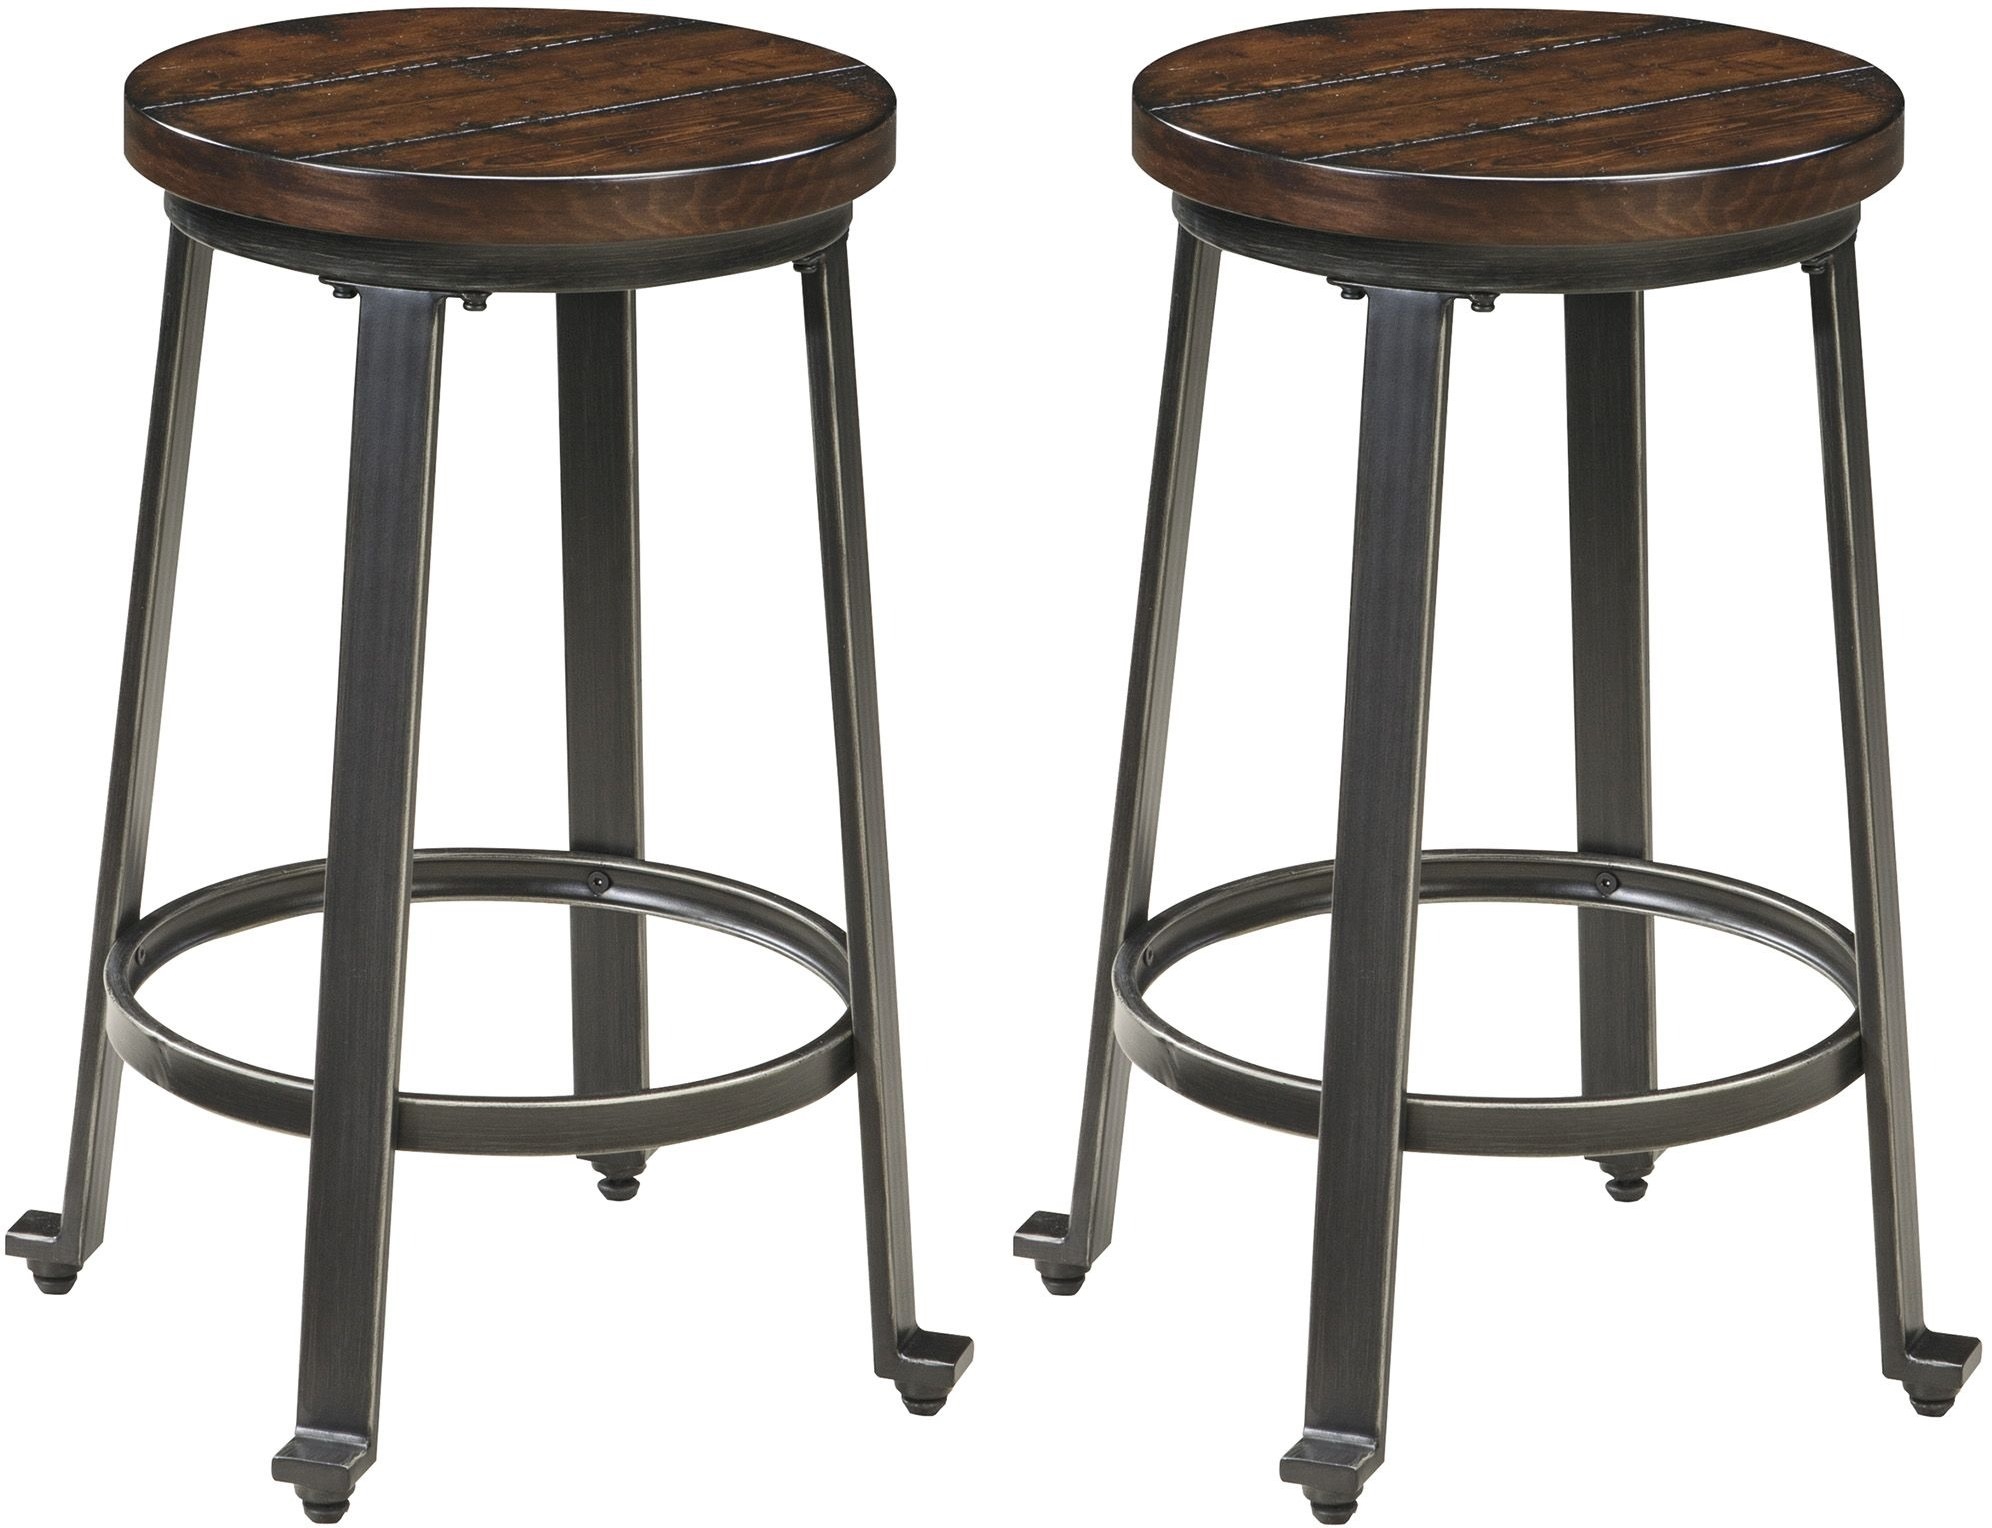 Signature Design by Ashley® Challiman 2-Piece Rustic Brown Bar Stool